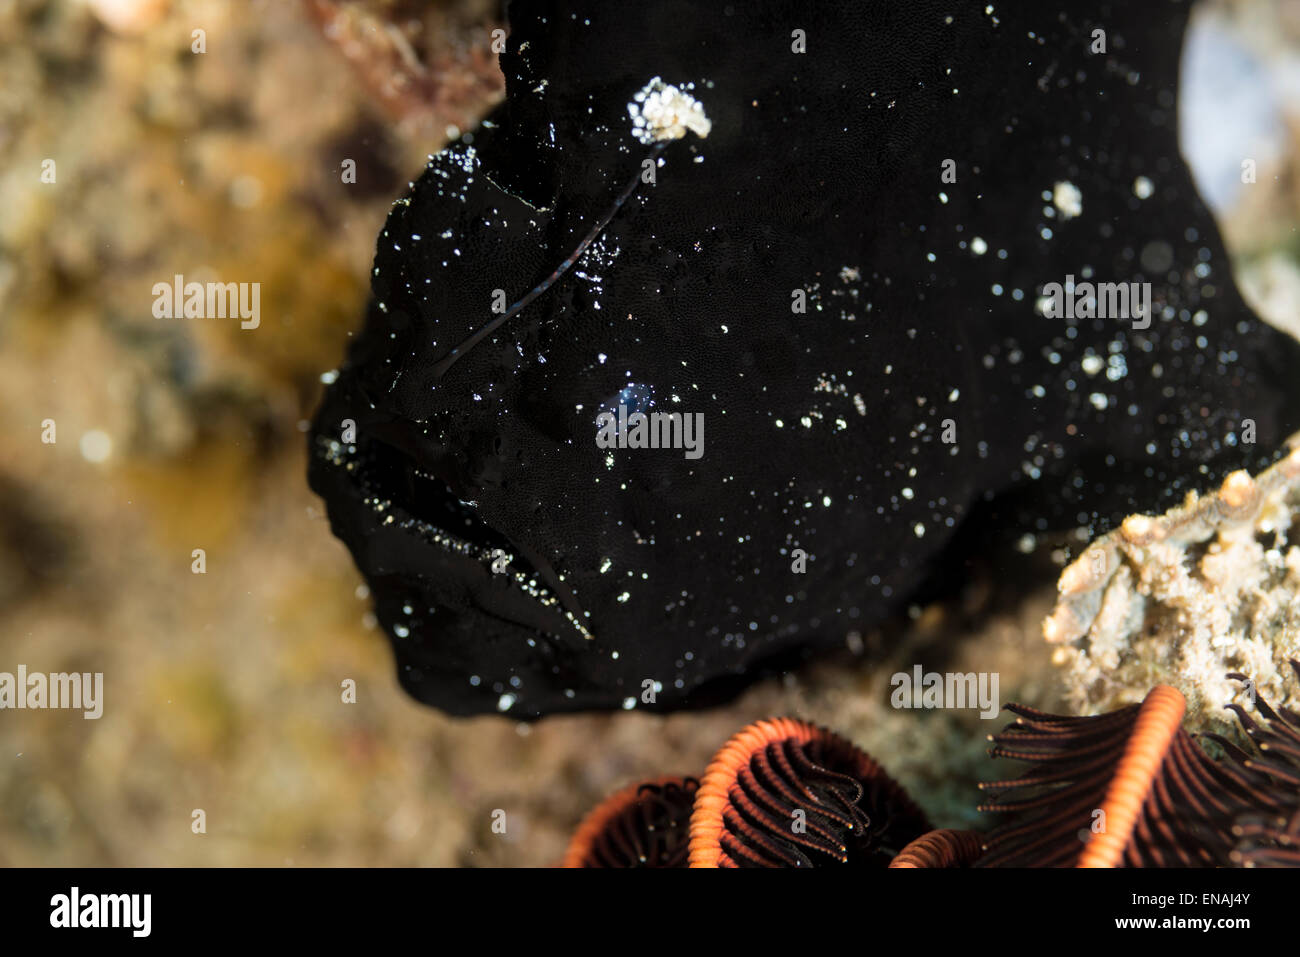 Black frogfish on a coral Stock Photo